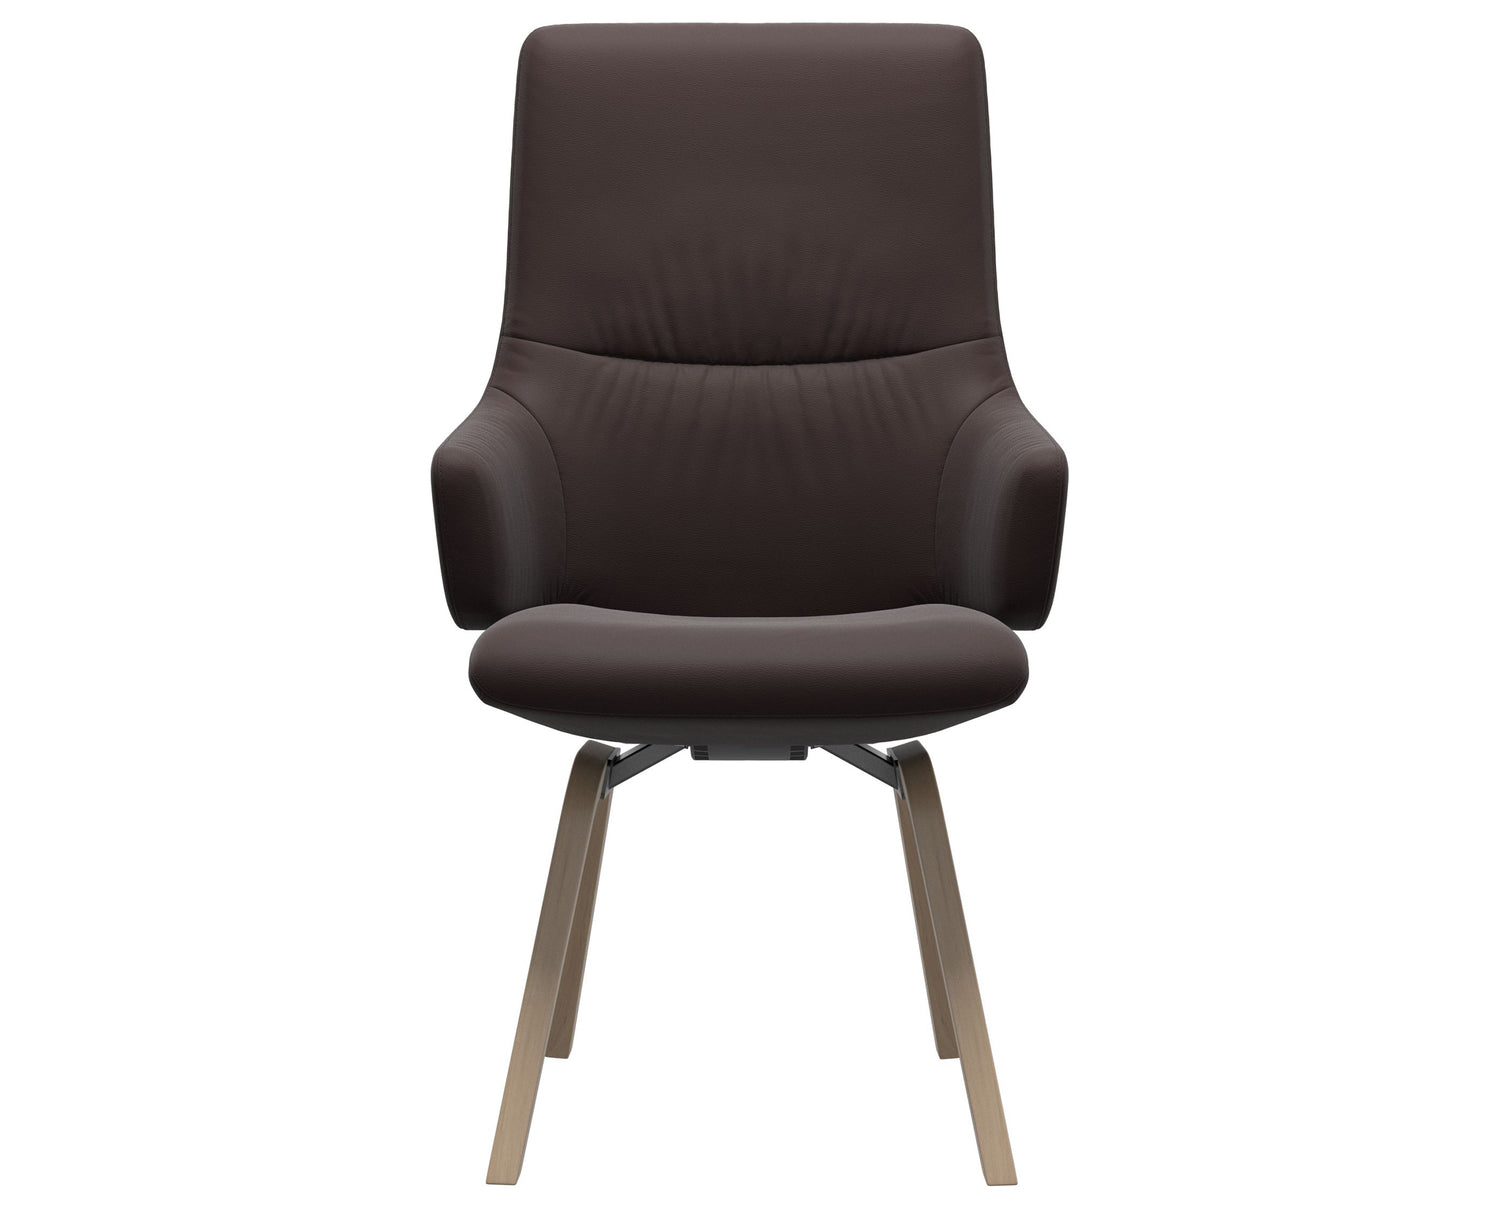 Paloma Leather Chocolate & Natural Base | Stressless Mint High Back D200 Dining Chair w/Arms | Valley Ridge Furniture